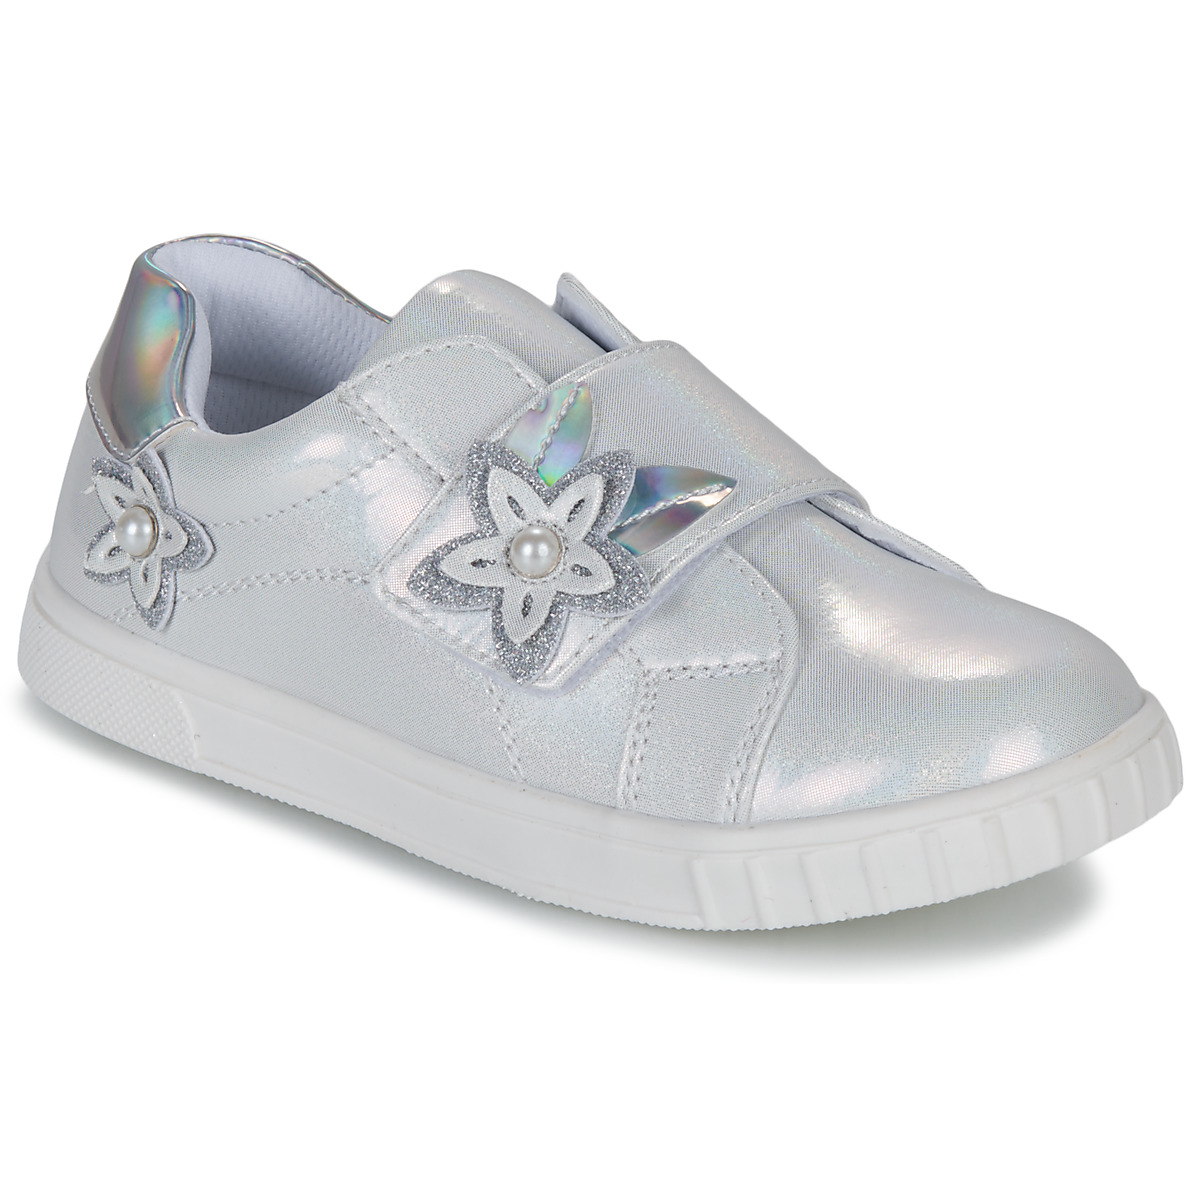 Shoes Girl Low top trainers Chicco CESCA Silver